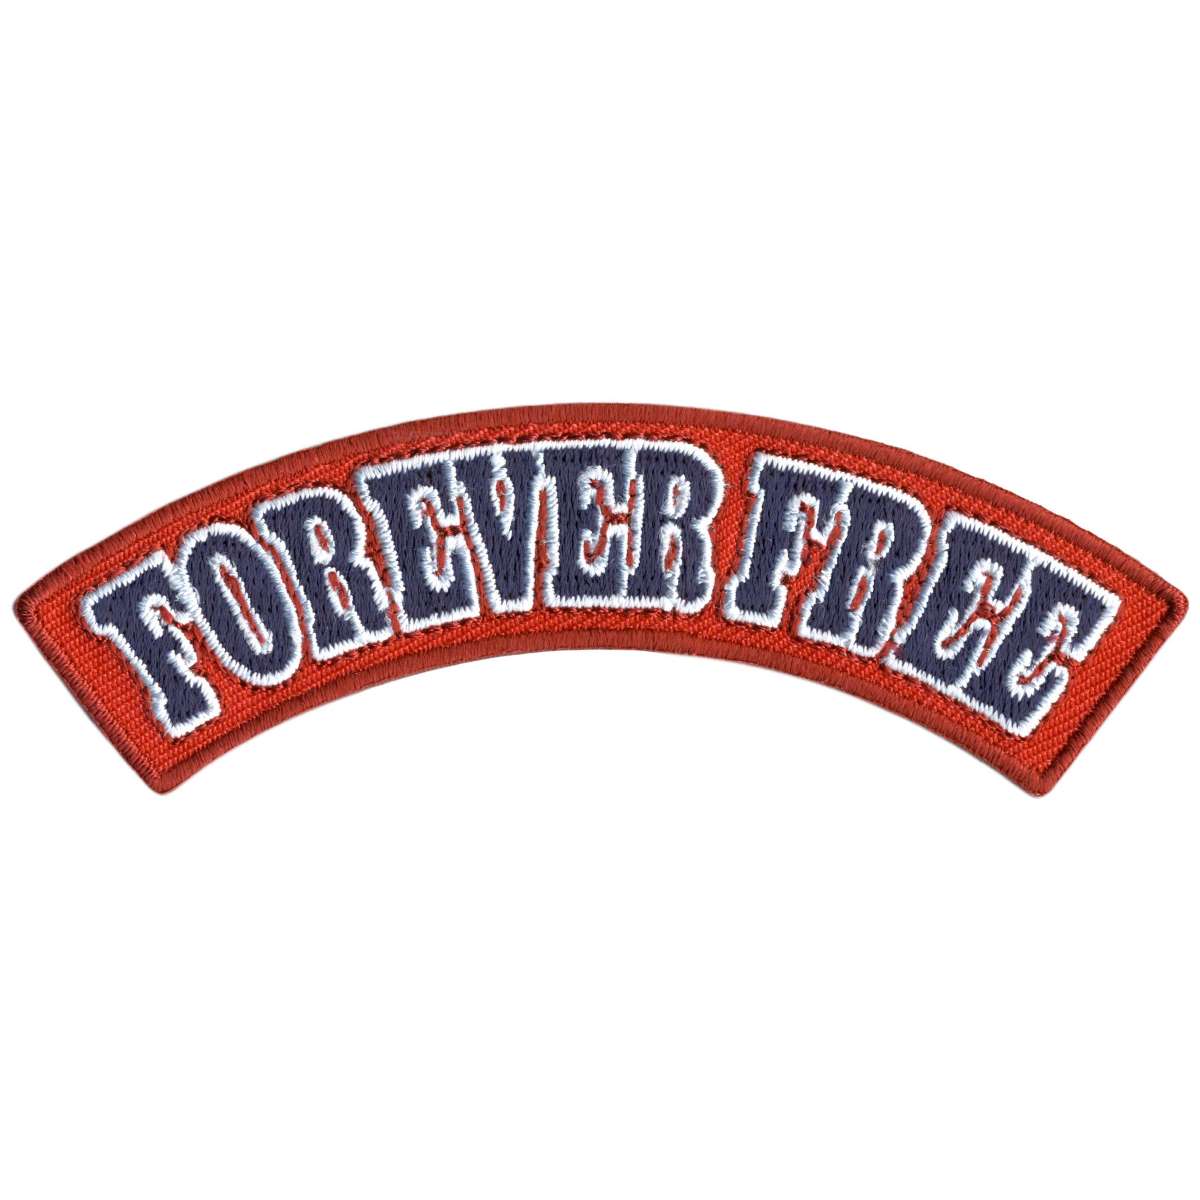 Hot Leathers Forever Free 4" X 1" Top Rocker Patch PPM4190